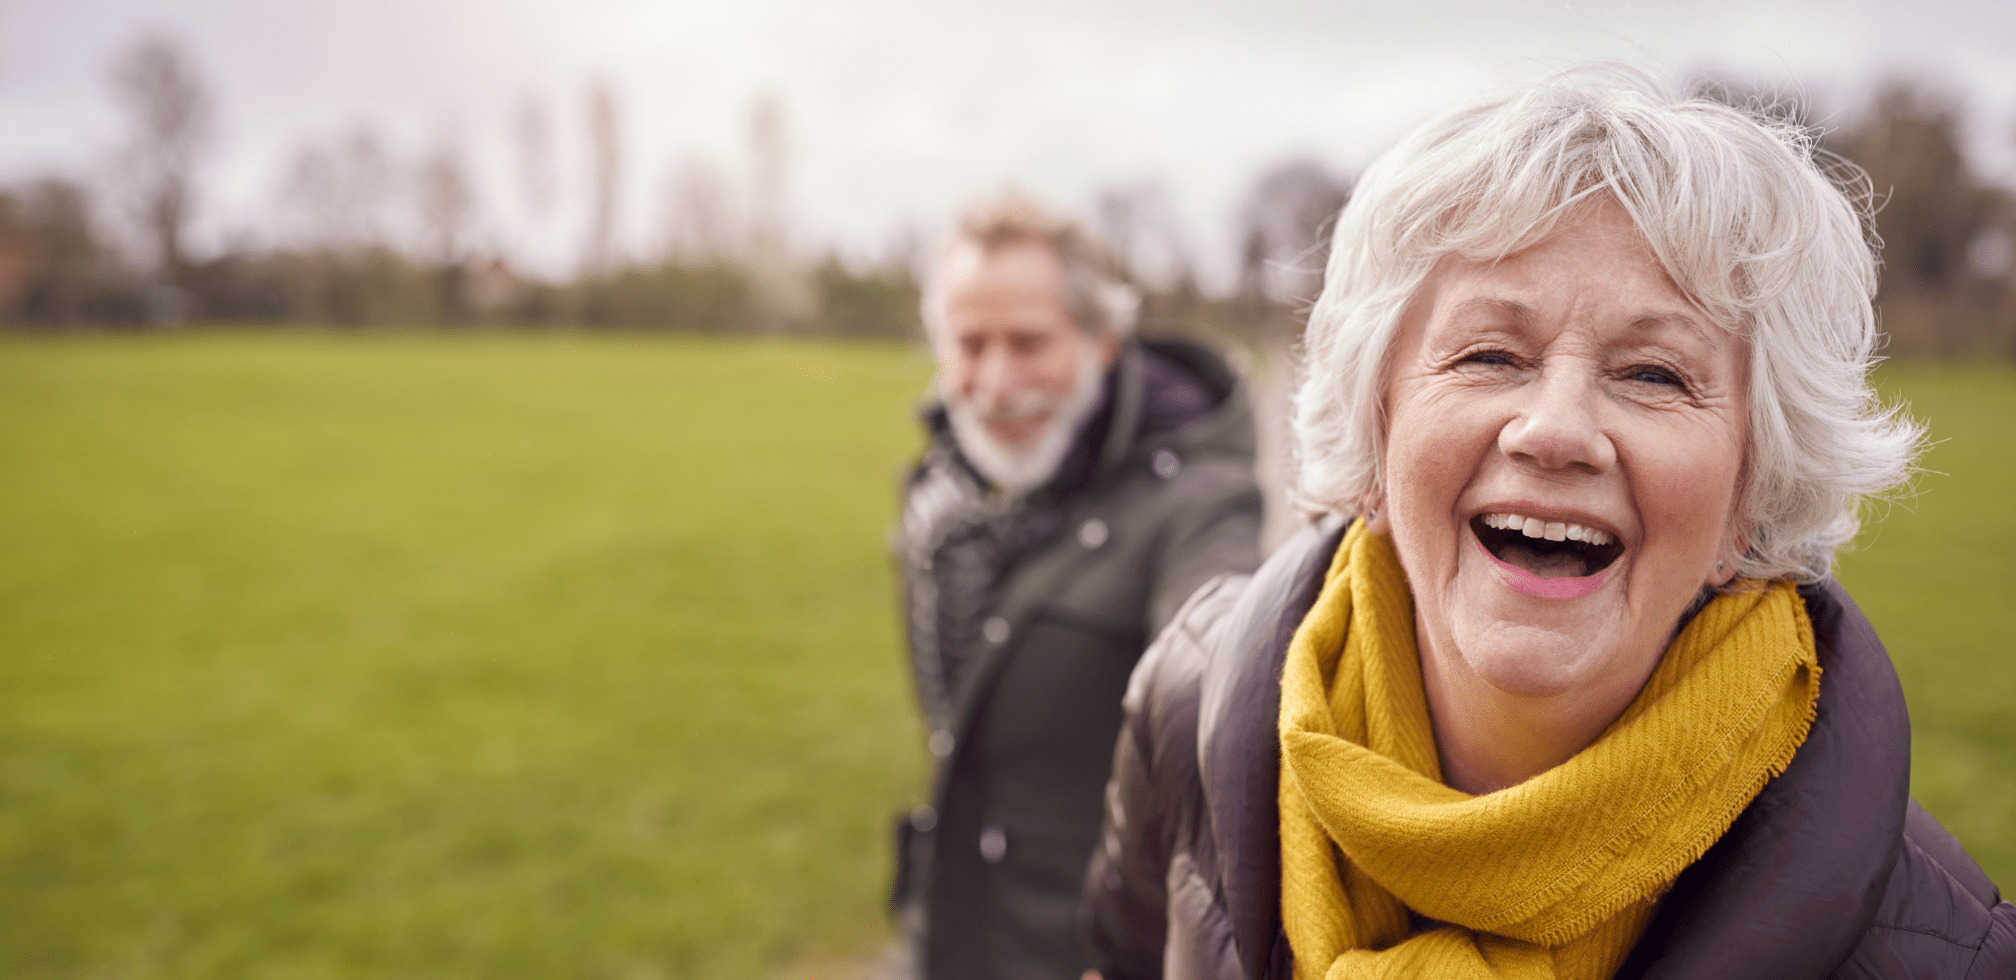 A joyful elderly woman smiling in the foreground with an older man out of focus in the background outdoors.